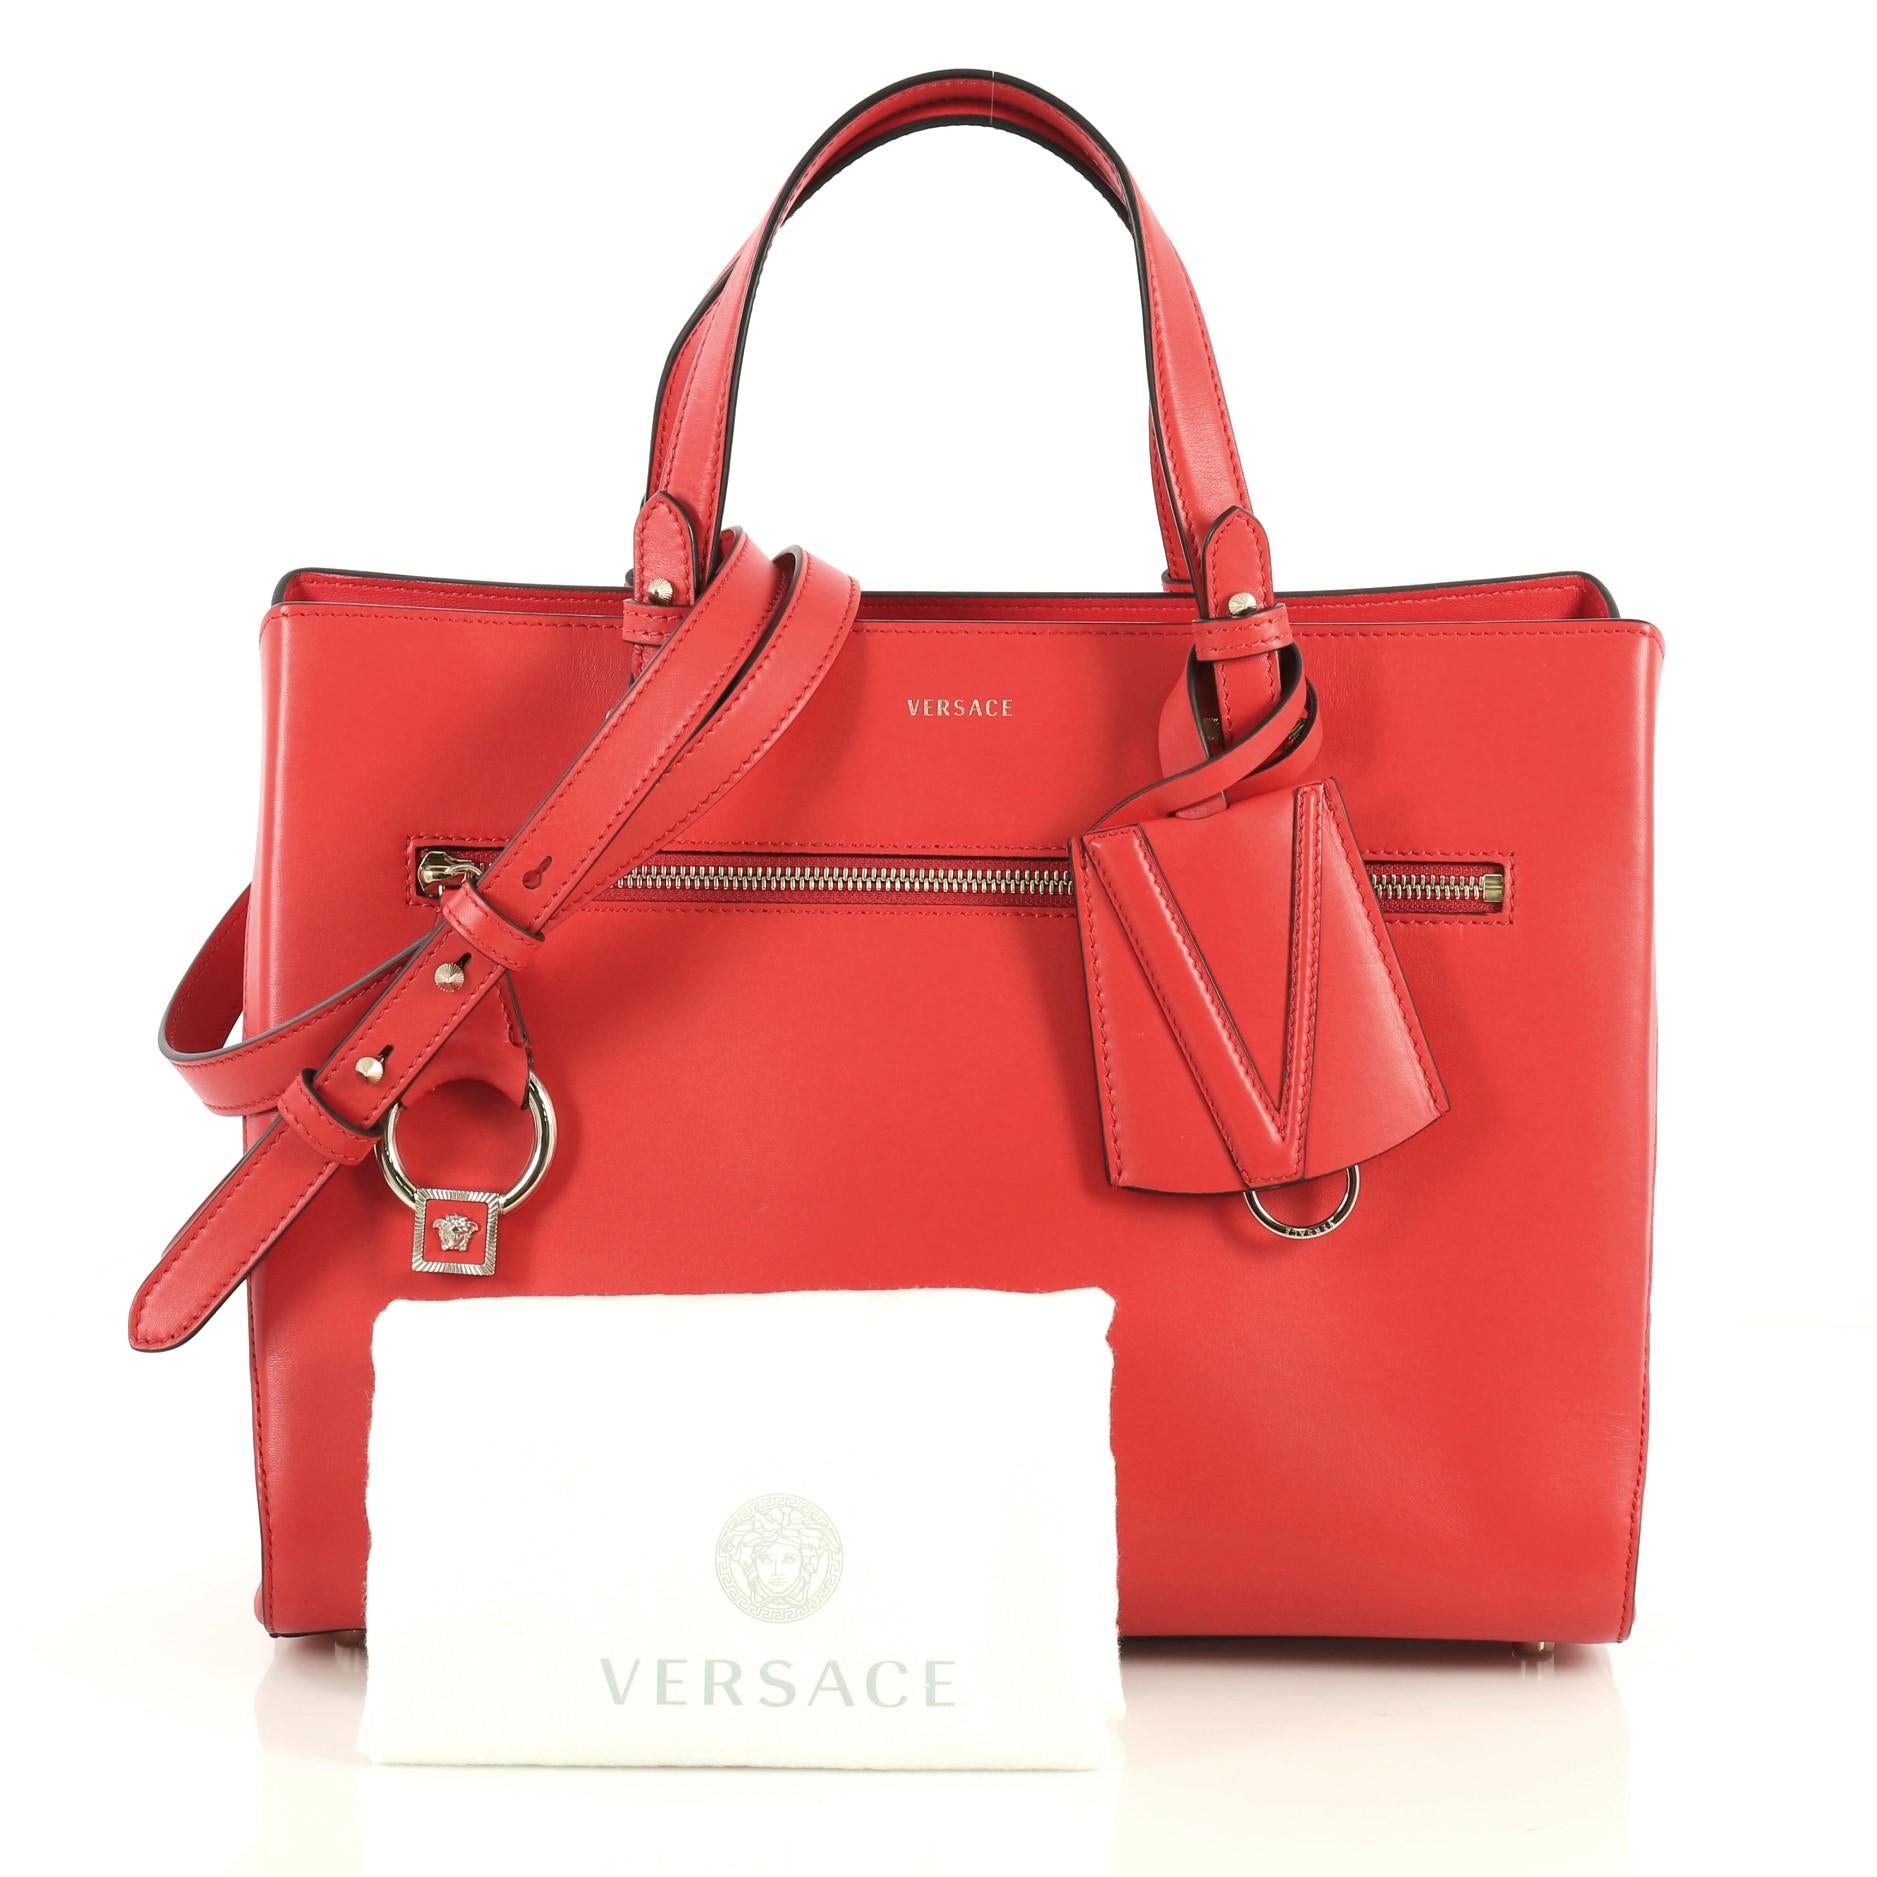 This Versace DV One Tote Leather Medium, crafted in red leather, features dual leather handles, exterior zip pocket and gold-tone hardware. It opens to a red leather interior with a center zip compartment. 

Estimated Retail Price: $3,075
Condition: